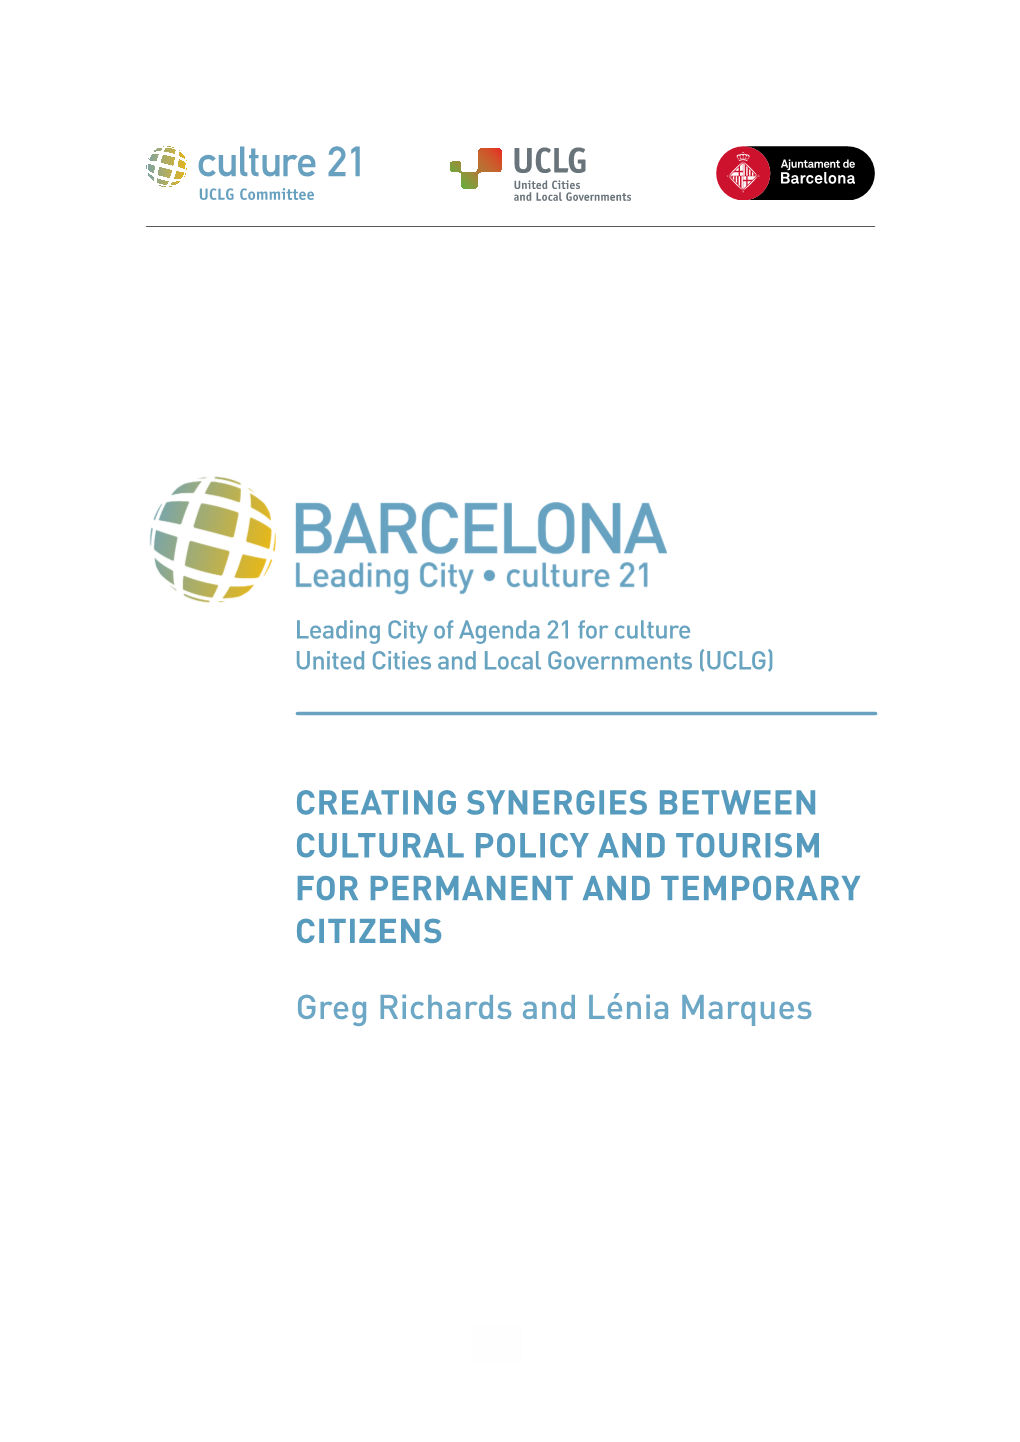 Creating Synergies Between Cultural Policy and Tourism for Permanent and Temporary Citizens